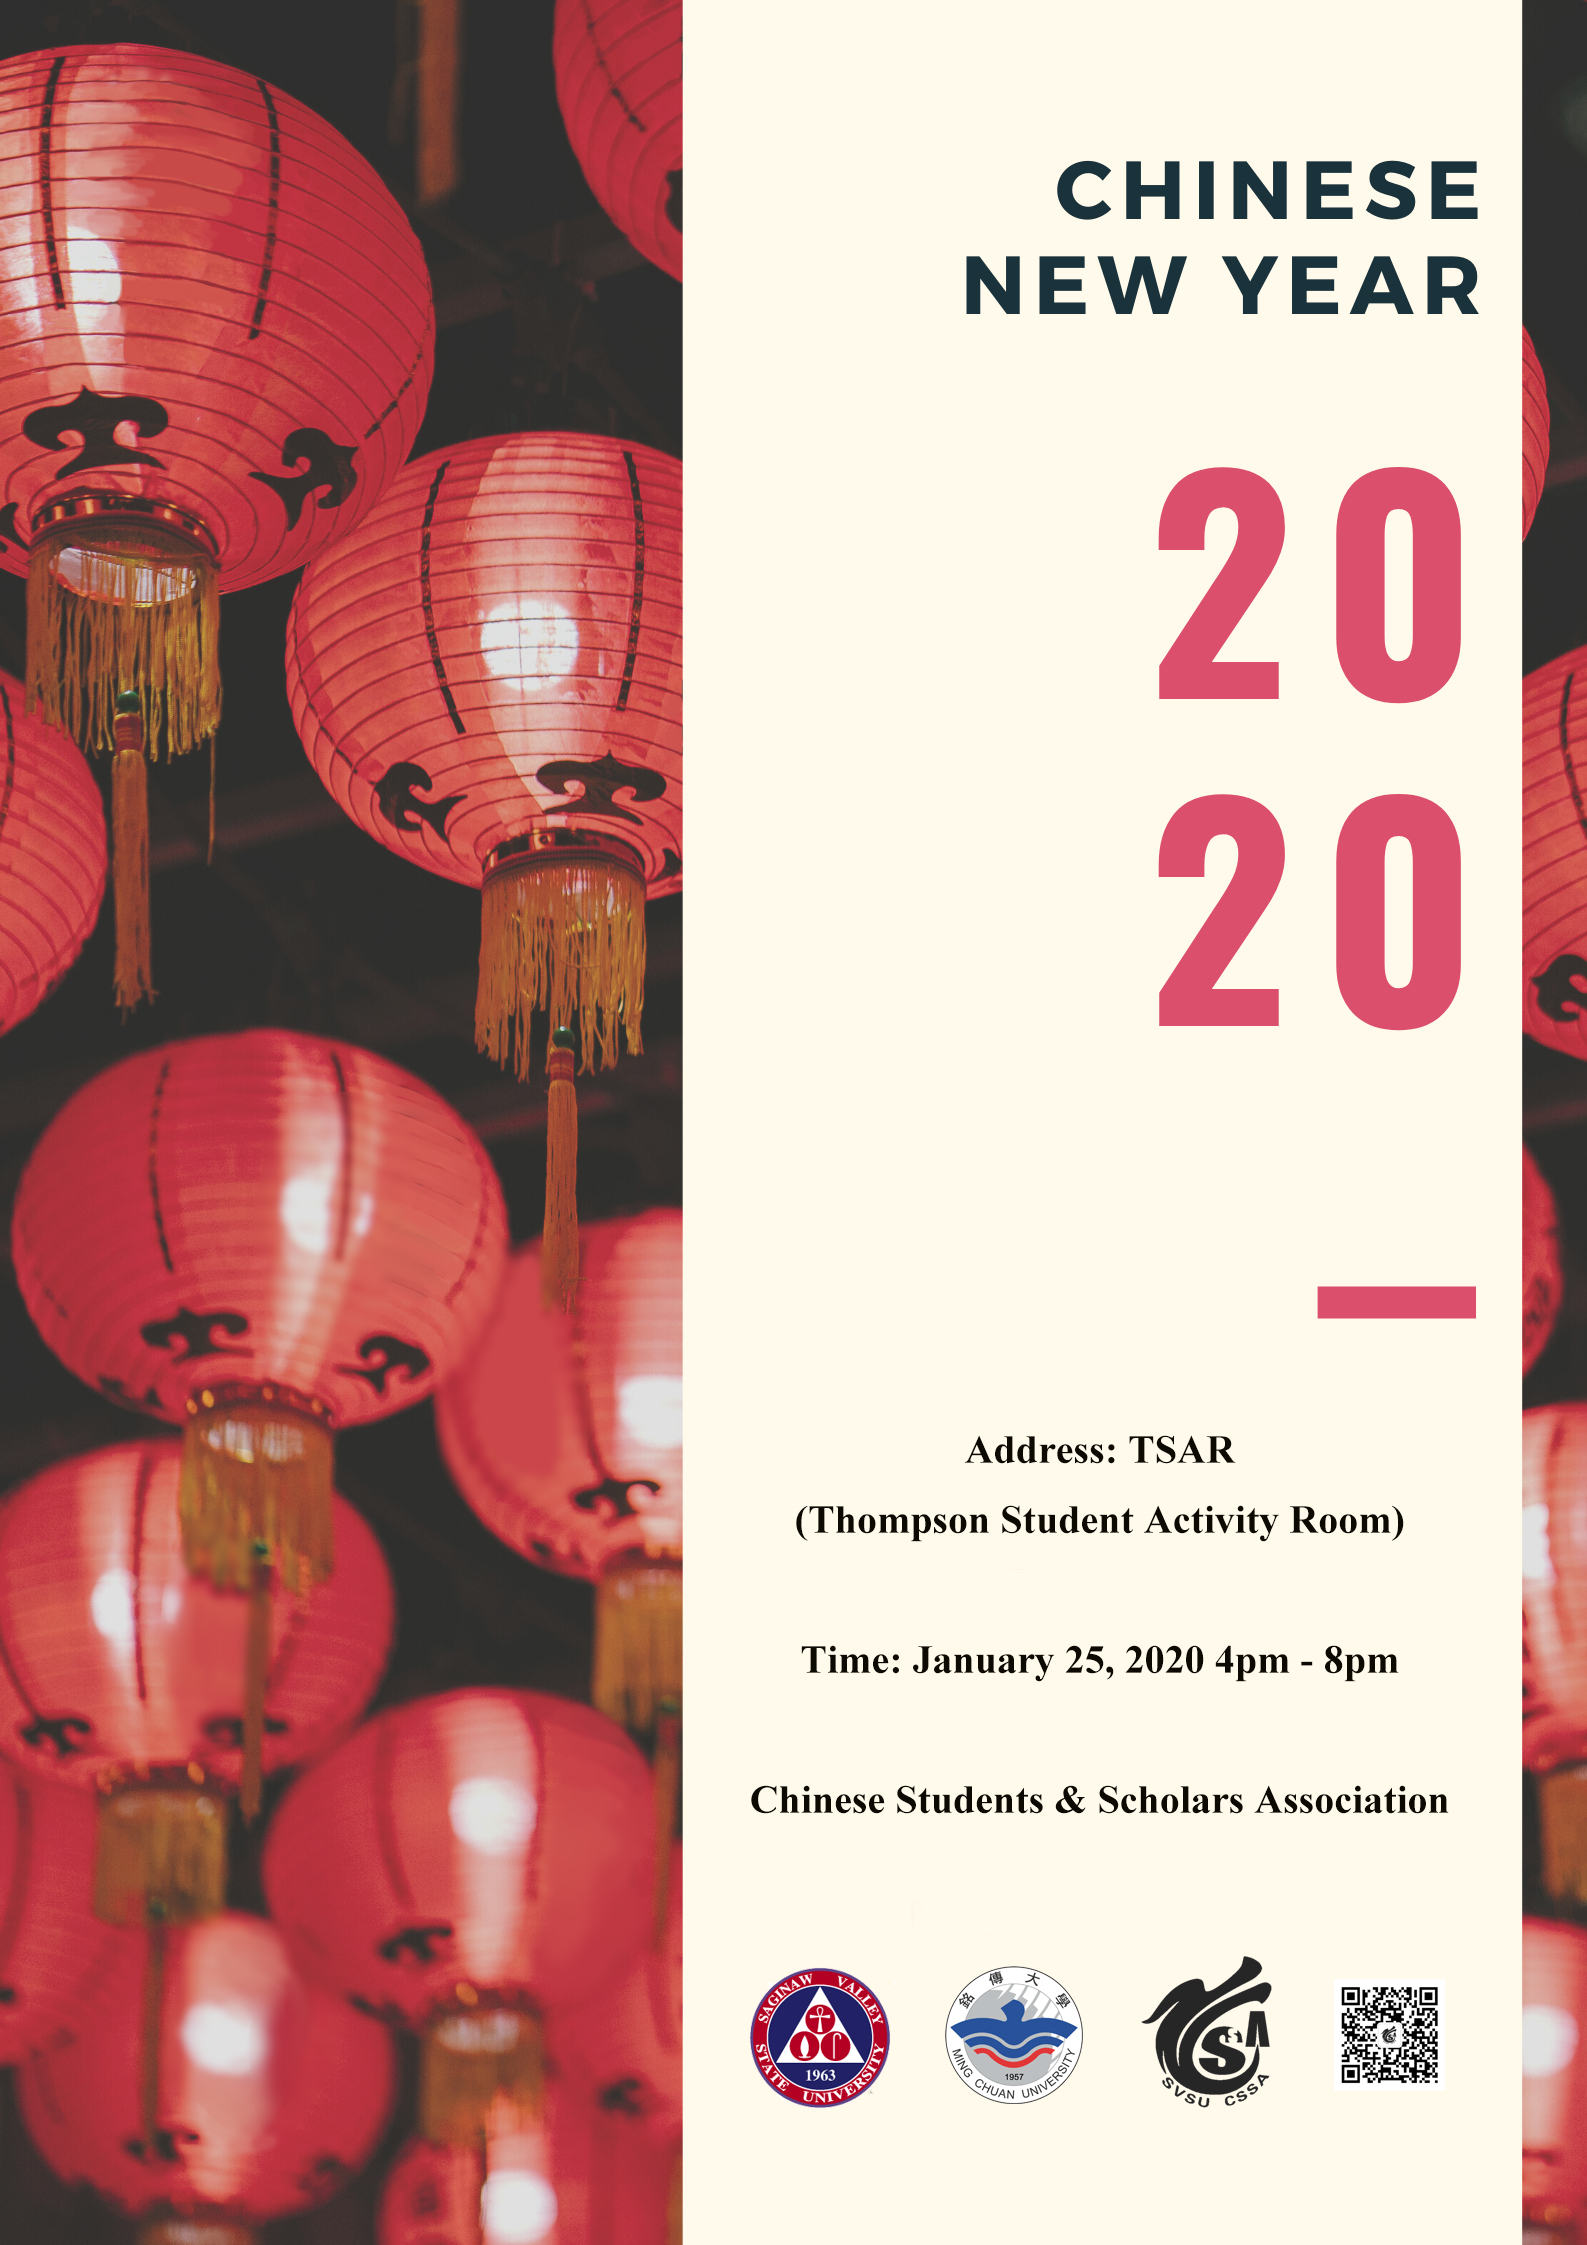 Chinese New Year Party on January 25, 2020.